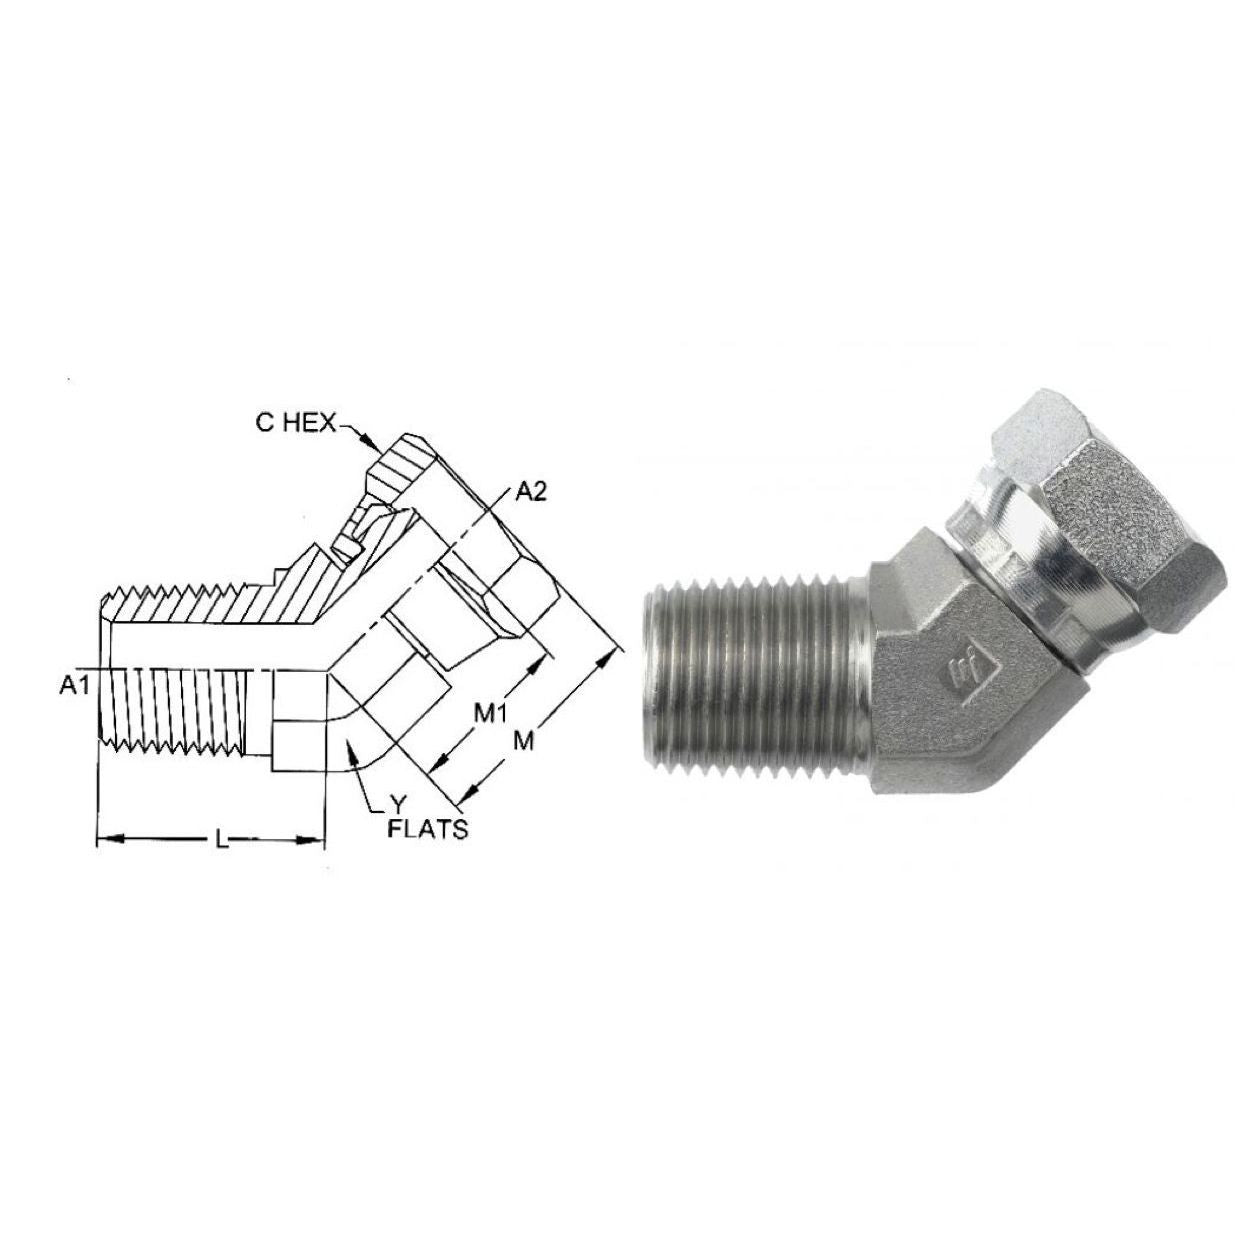 1503-16-16-SS : OneHydraulics 45-Degree Elbow, 1 Male NPT x 1 Female NPT Swivel, Stainless Steel, 2400psi